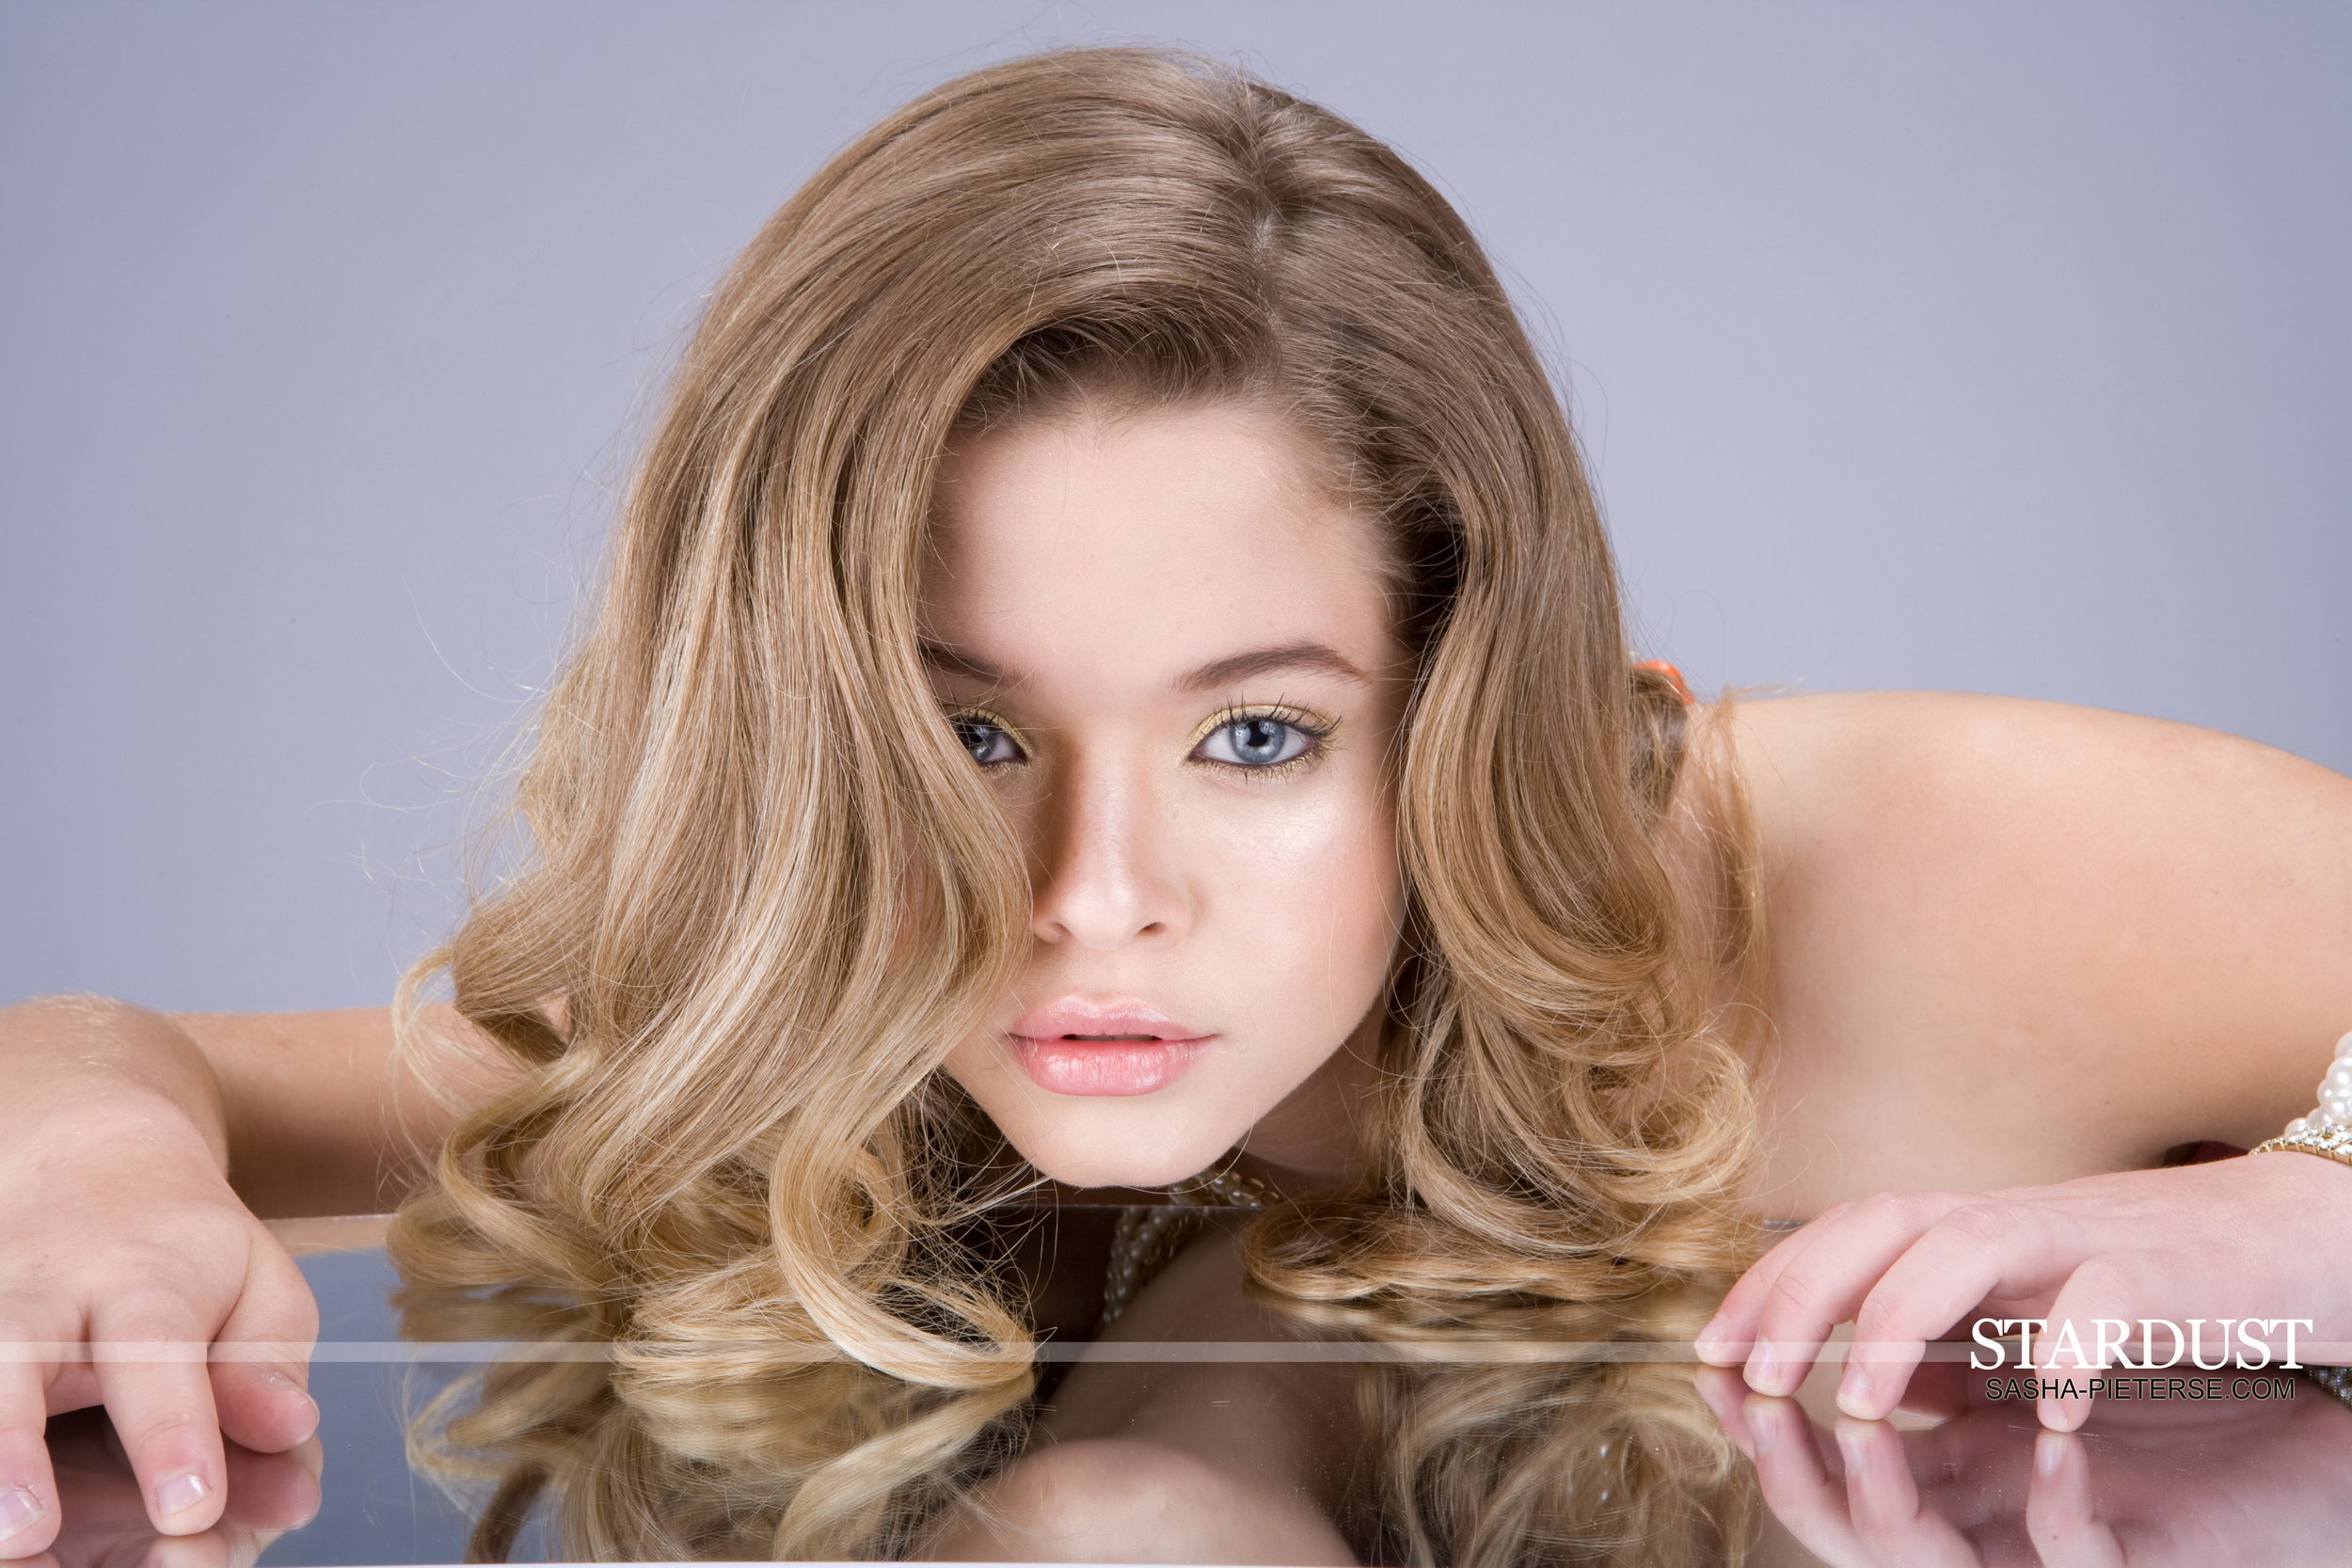 3. "How to Get Sasha Pieterse's Blonde Hair Color" - wide 8